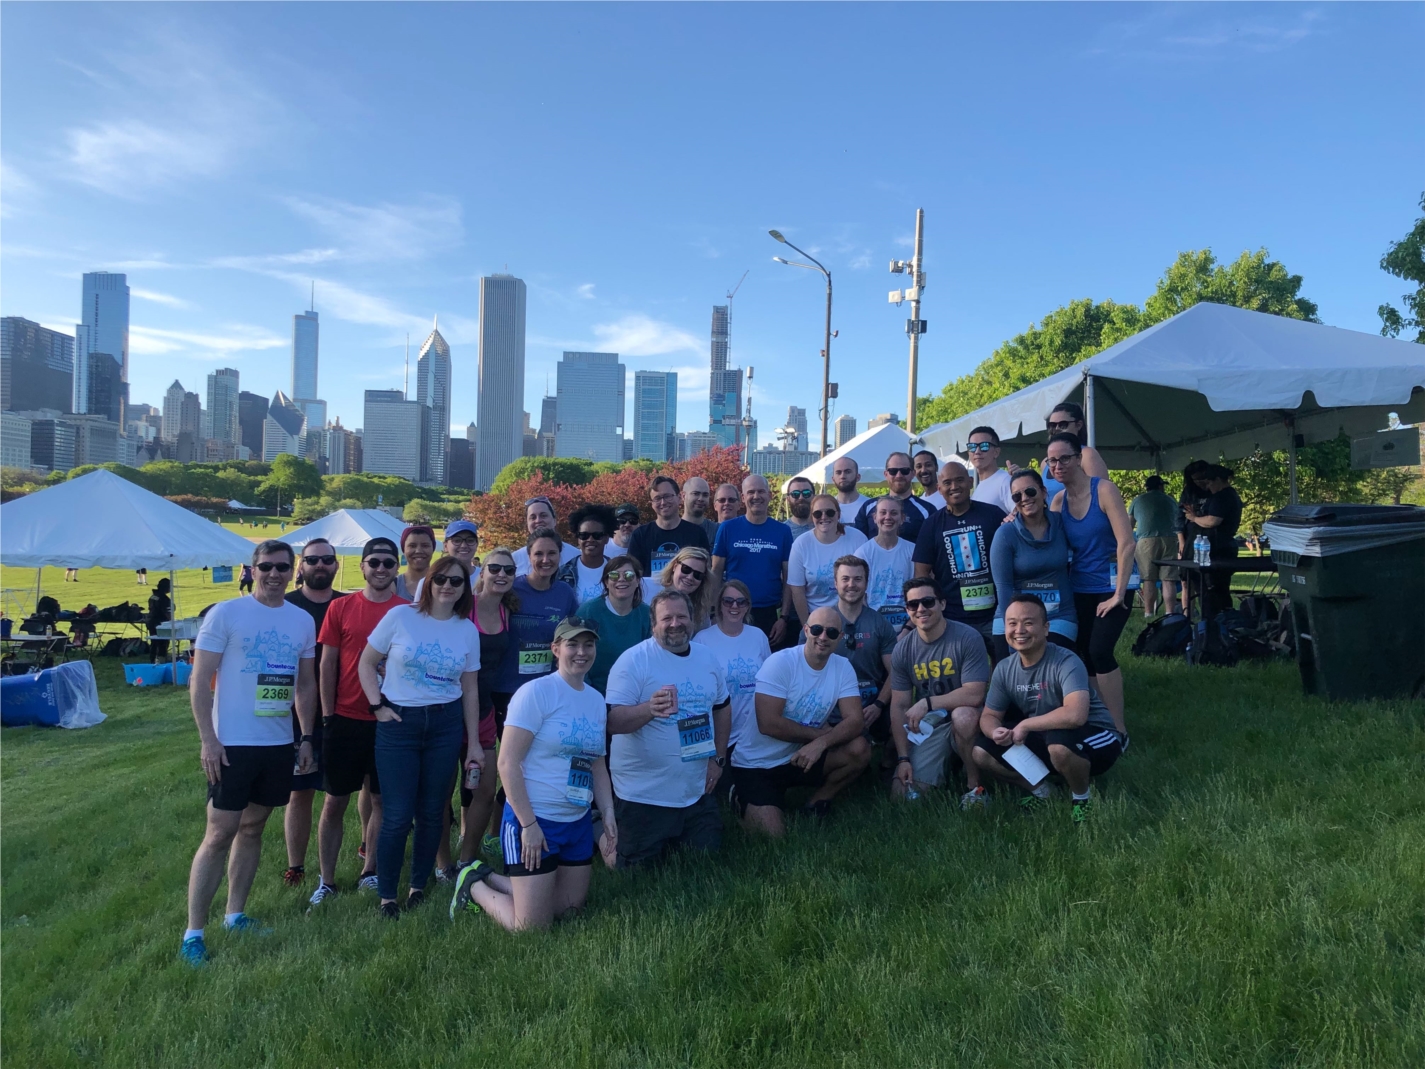 Walking, running, tent crewing - we’ll take on any challenge! Team Bounteous at the 2019 J.P. Morgan Corporate Challenge in Millennium Park.